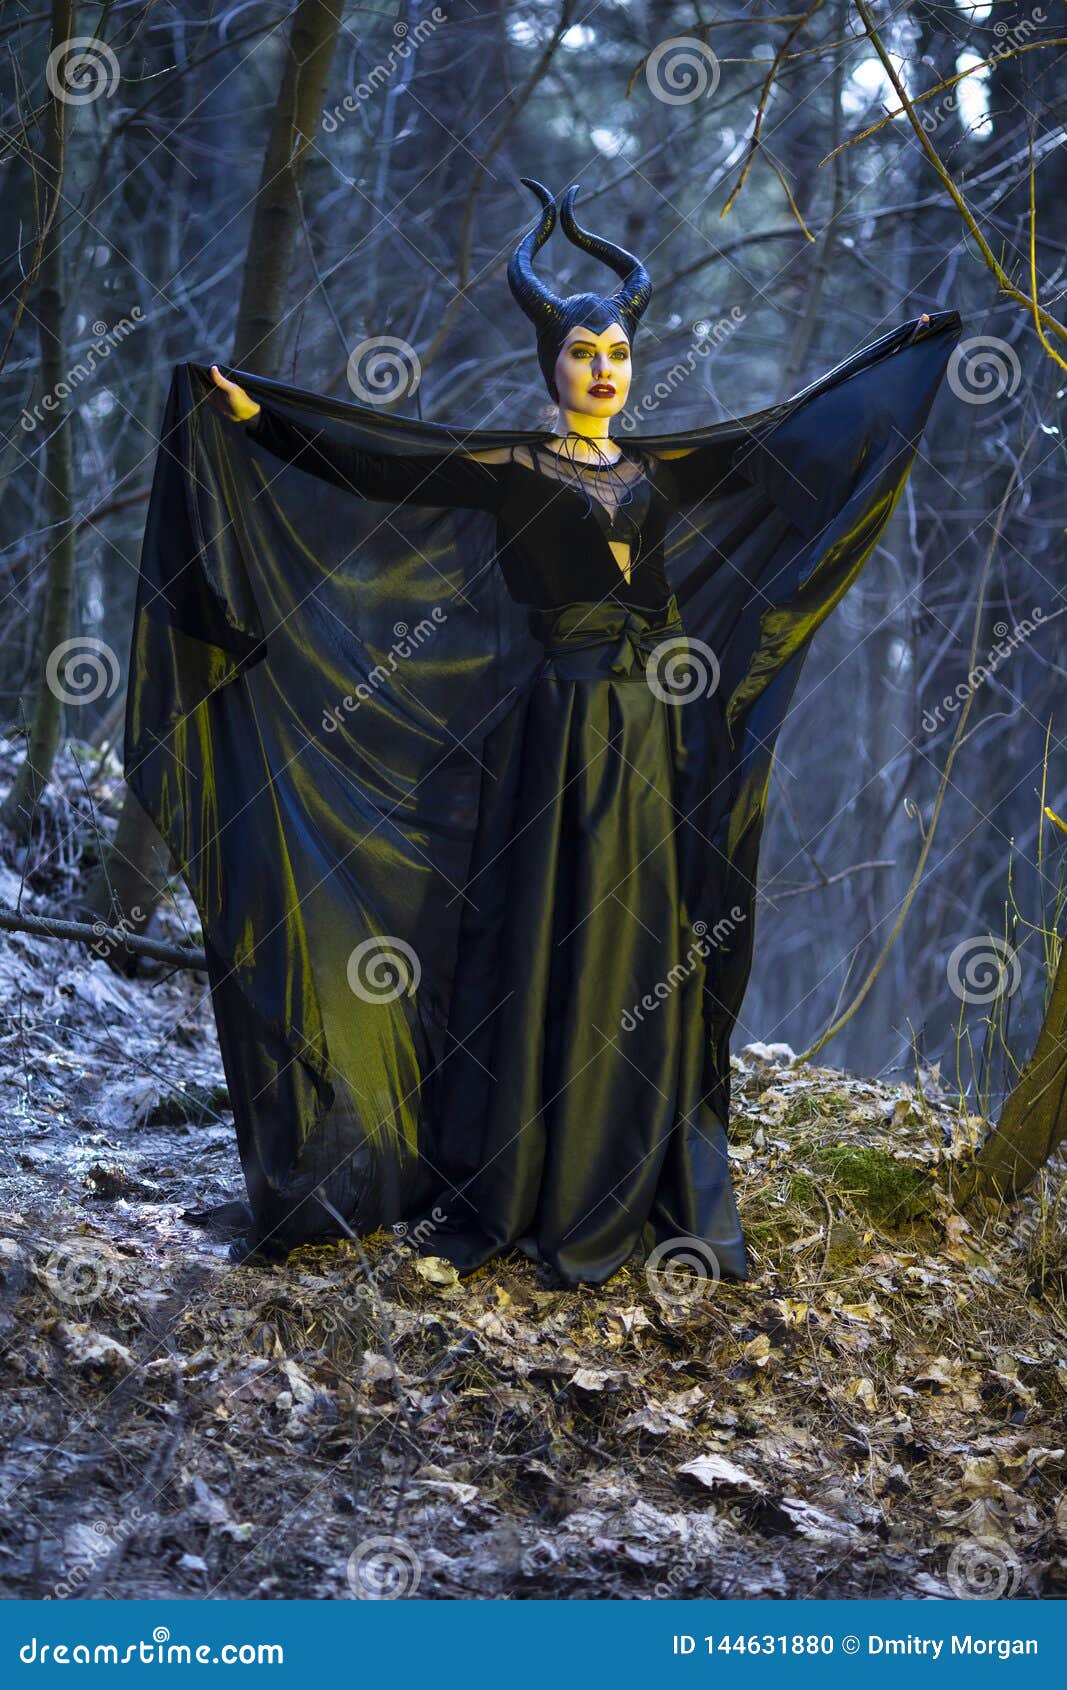 Costume Drama Play. Mysterious and Magical Maleficent Woman with ...